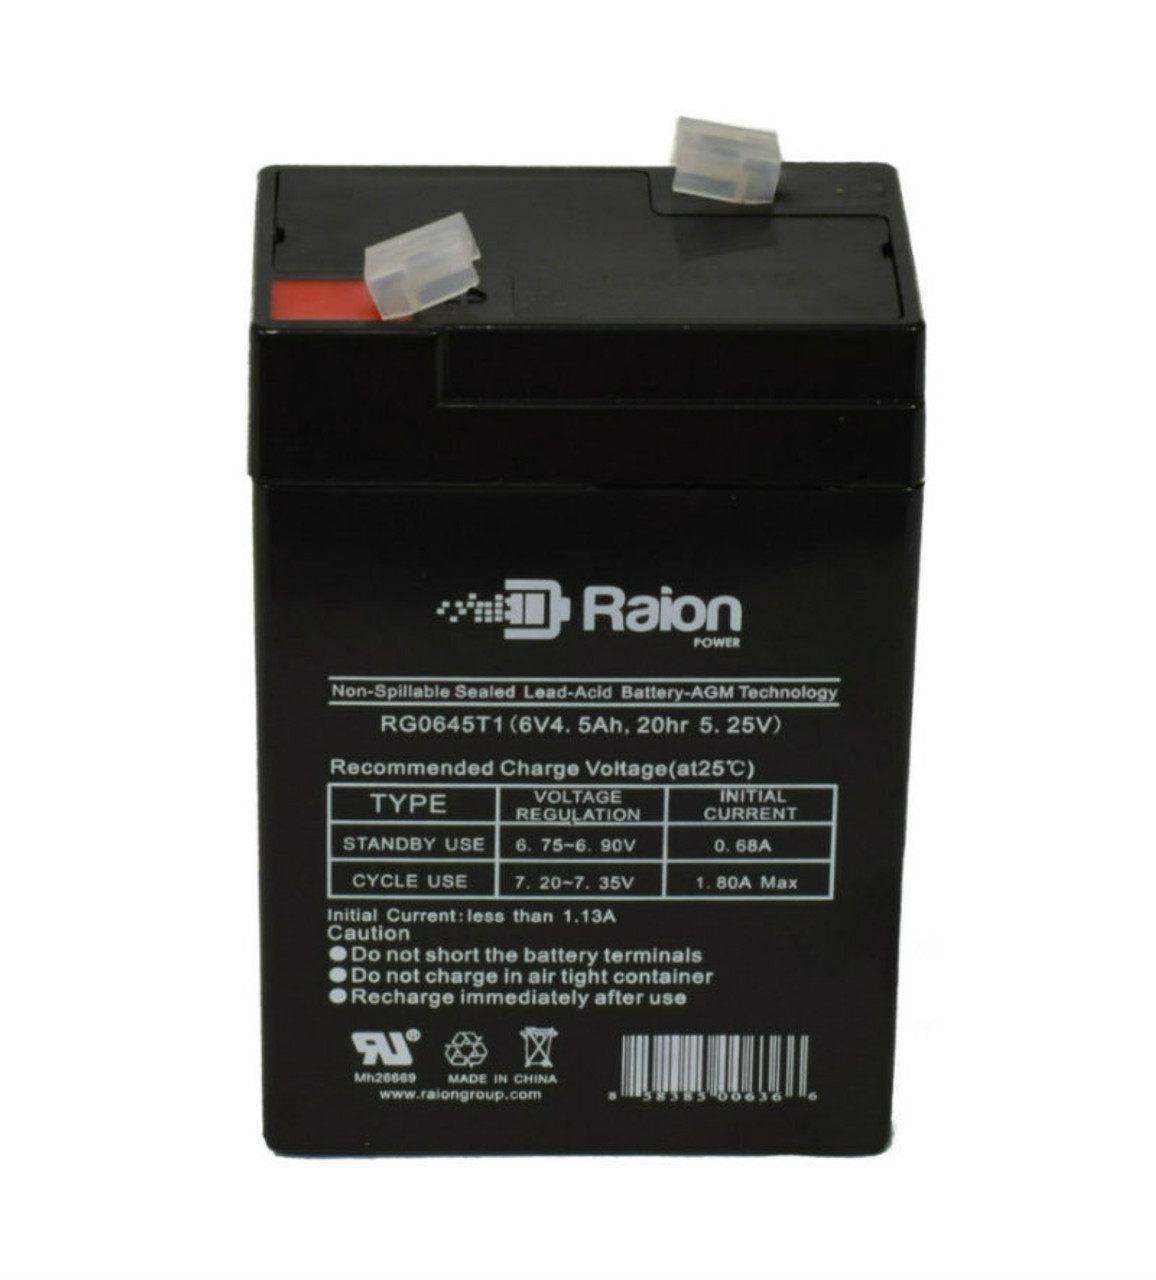 Raion Power RG0645T1 Replacement Battery Cartridge for FirstPower FP640K